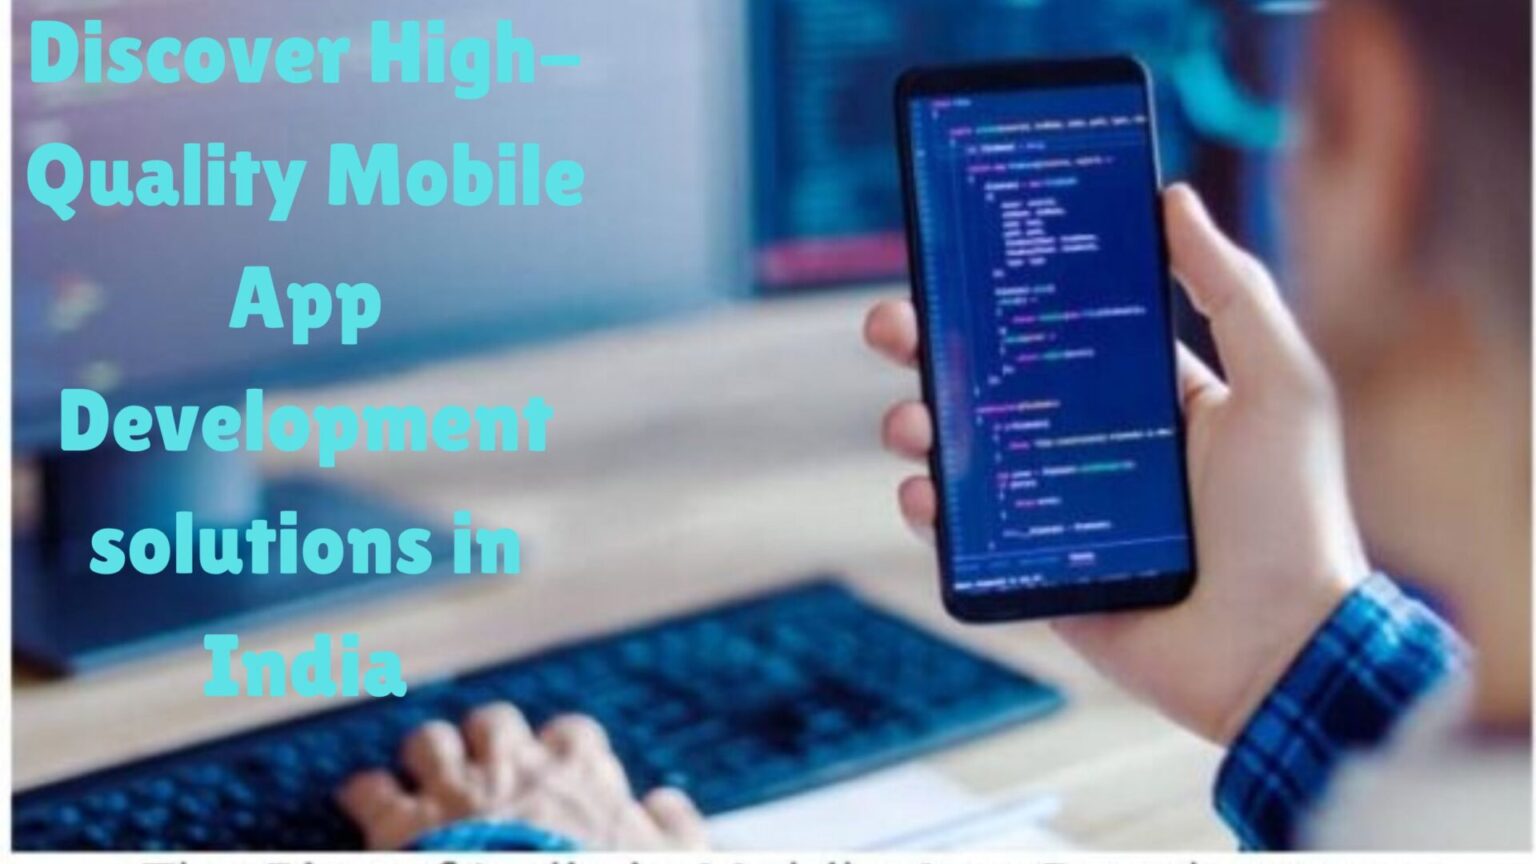 Discover High-Quality Mobile App Development solutions in India